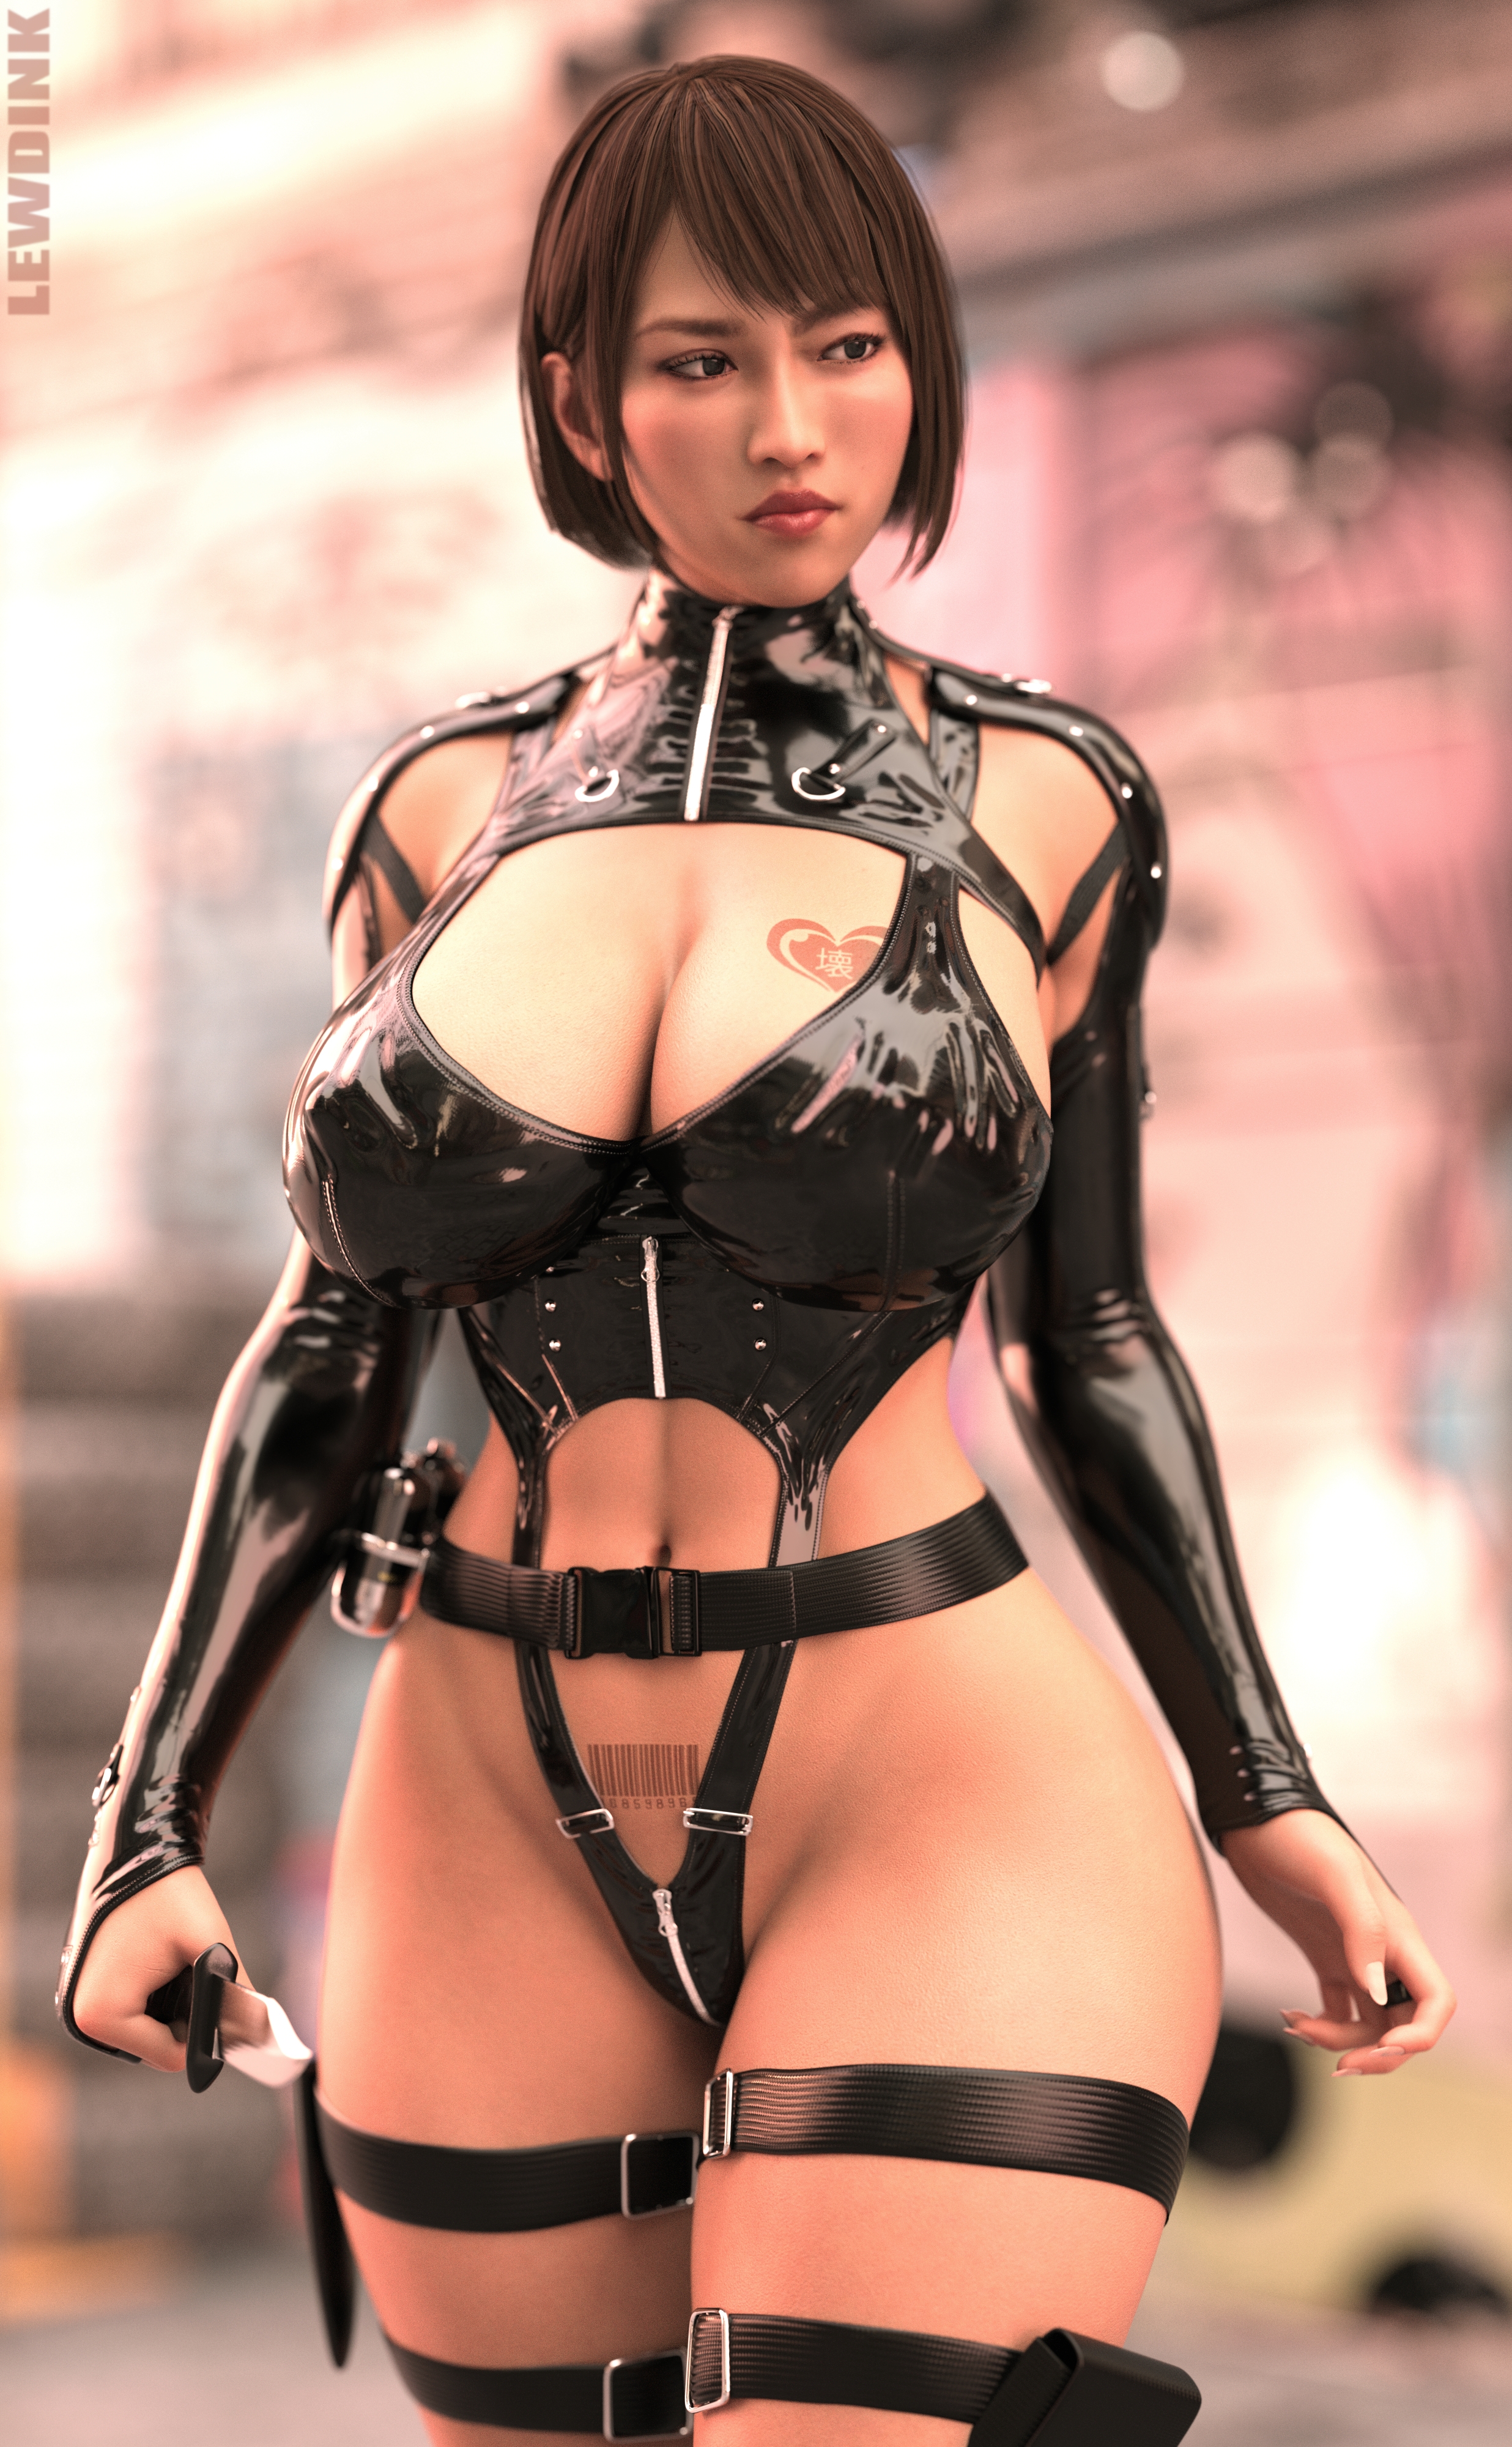 Saeko Mukoda - Yakuza Like a Taimanin Yakuza Saeko Mukoda Muscular Girl 3d Porn 3d Girl 3dnsfw 3dxgirls Abs Sexy Hot Bimbo Huge Boobs Huge Tits Muscles Musclegirl Pinup Perfect Body Sexyhot Sexy Ass Sexy Woman Fake Tits Lips Latex Flexible Smirking Big Tits Huge Ass Big Booty Booty Fit Fitness Leggings Thicc Mom Milf Mature Mature Woman Latina Spread Thick Thighs Thighs Musclewoman Outdoor Exhibitionism Spread Legs Domination Dominatrix Dominant Showing Her Body Womb Tattoo Asian Asian Female Sexy Asian Japanese Tattoo Tattoos Face Tattoo